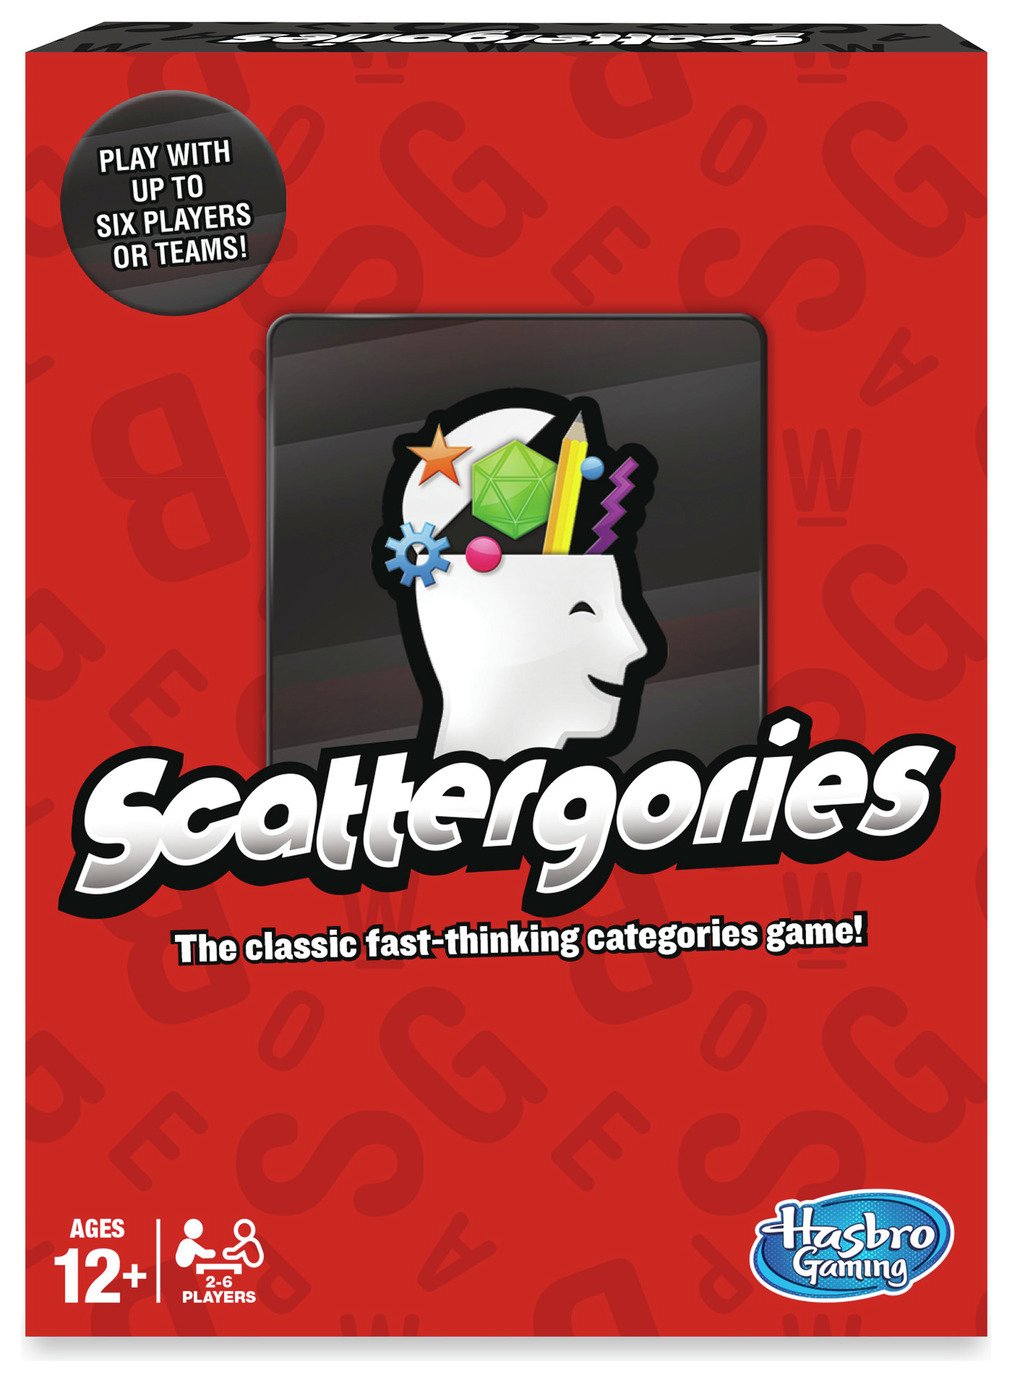 Scattergories Game from Hasbro Gaming. Review